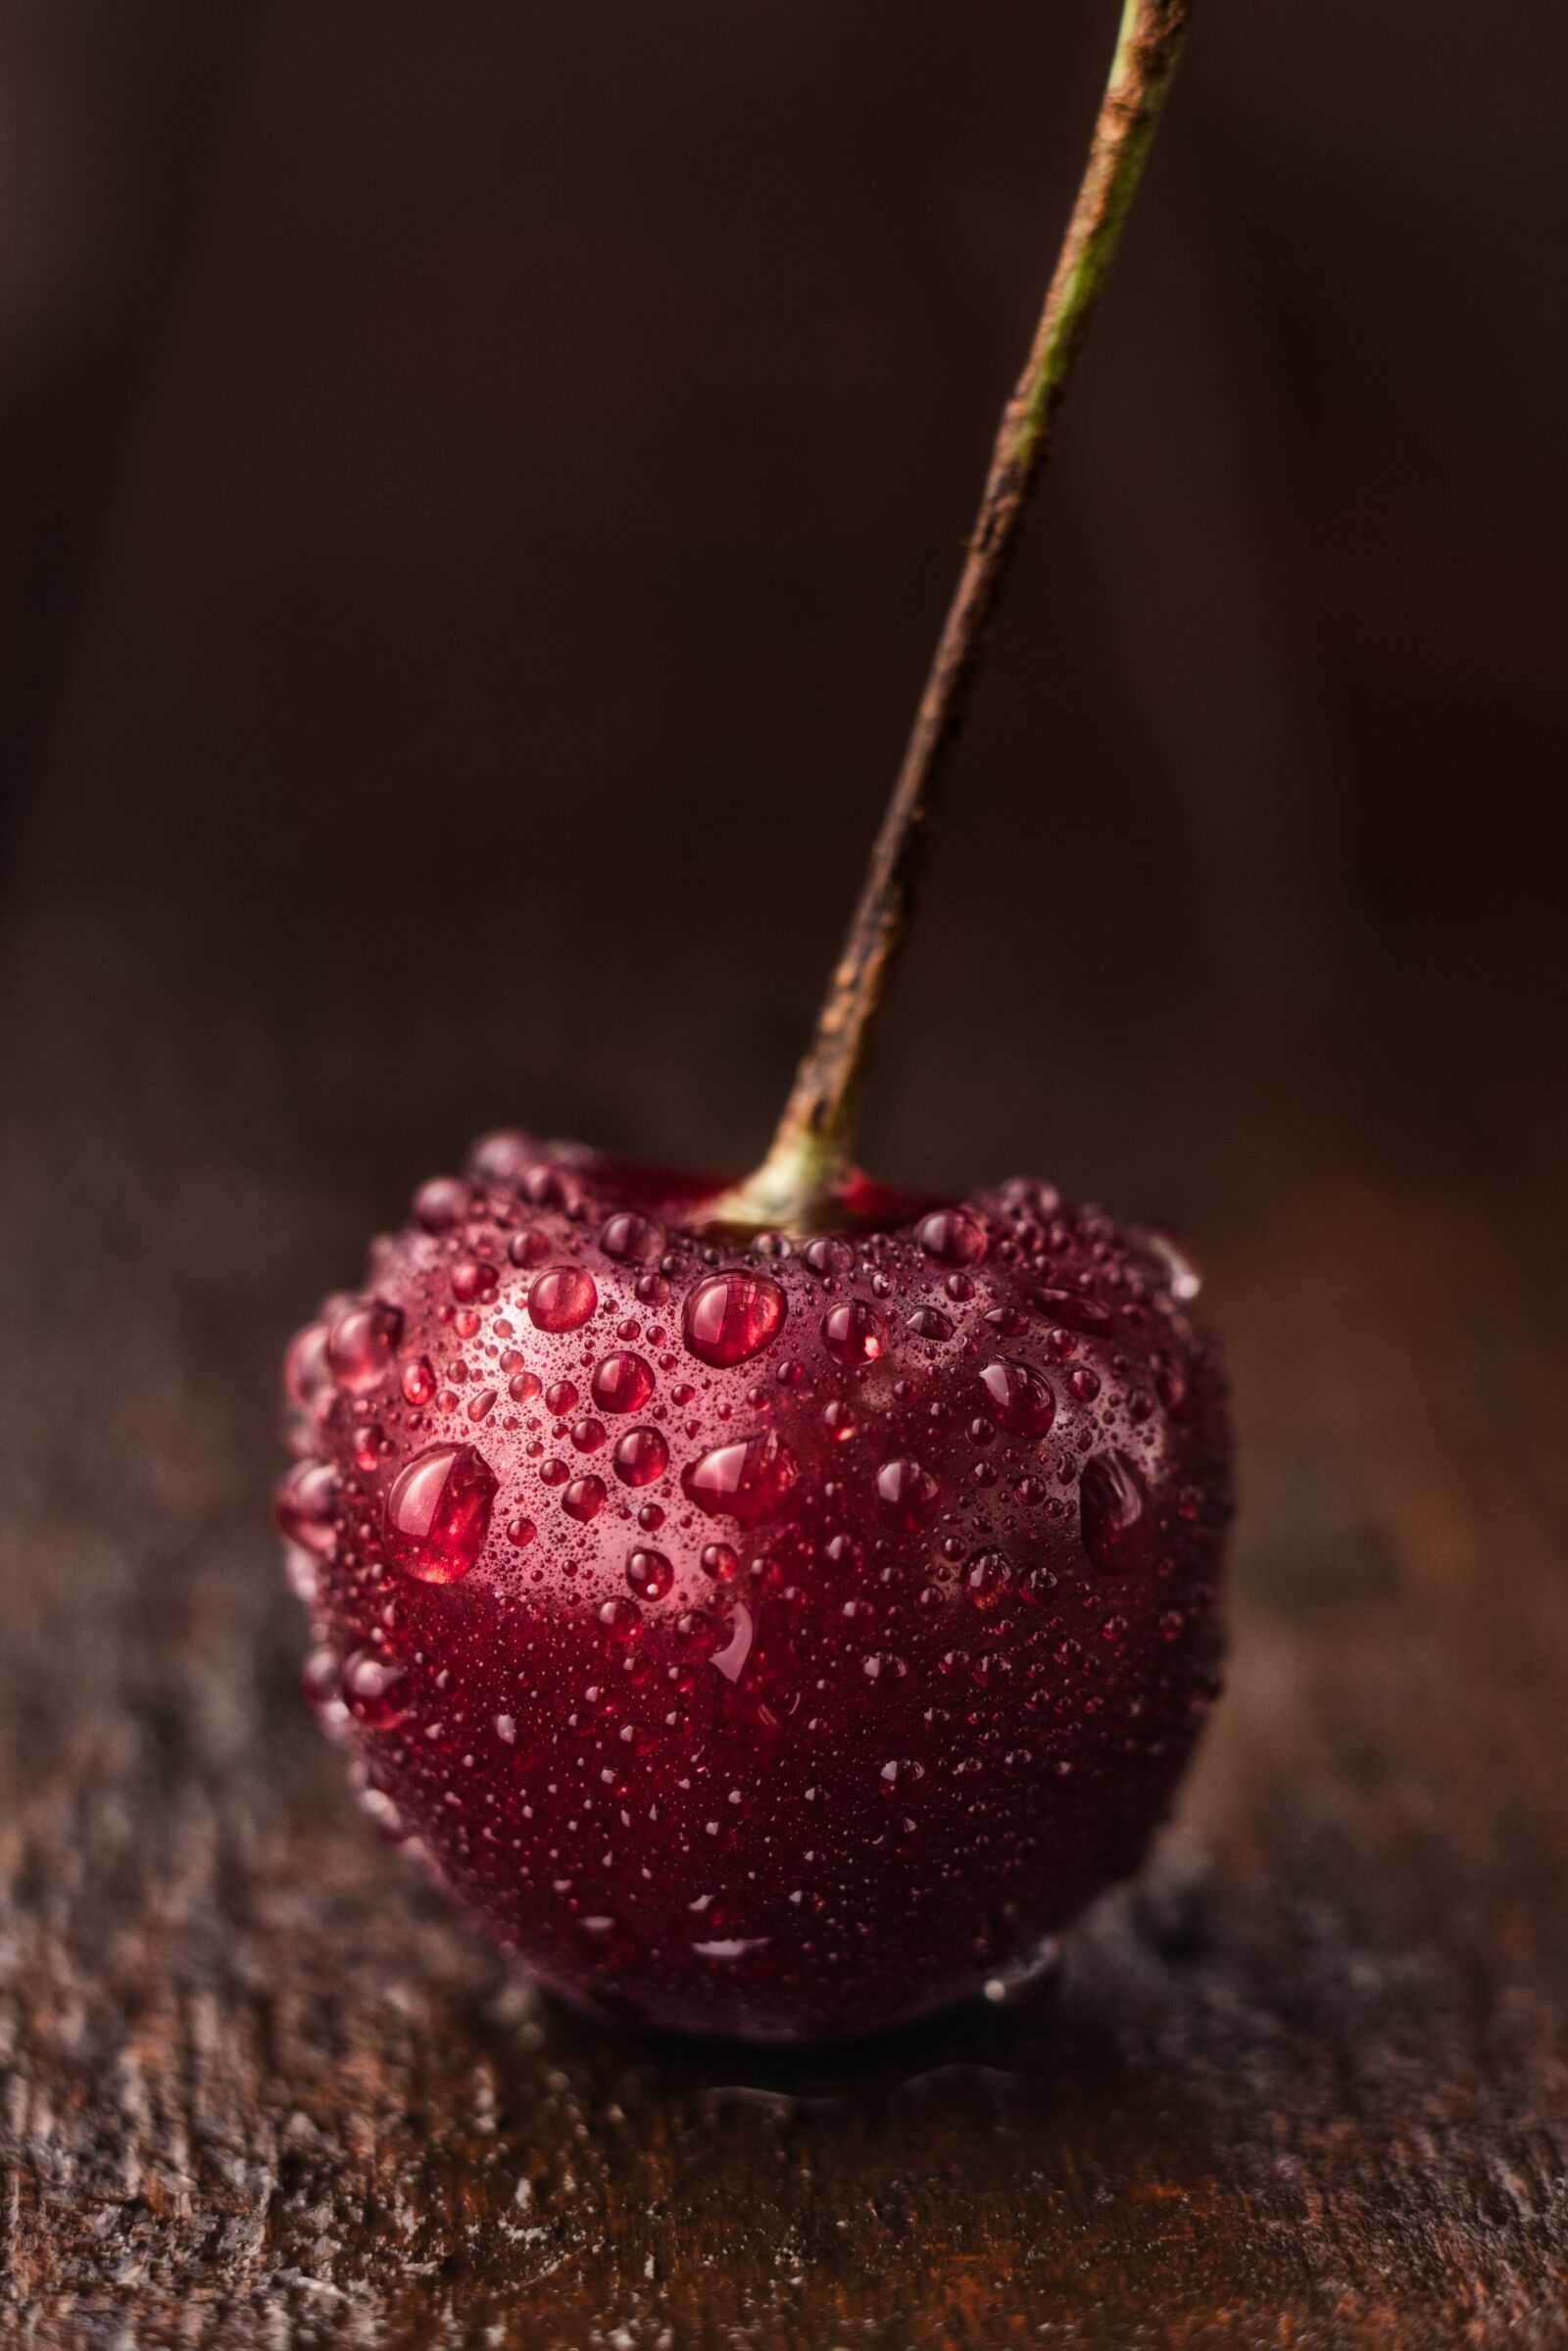 Sony a6400 sample photo. Cherry, fruit, self-picked photography